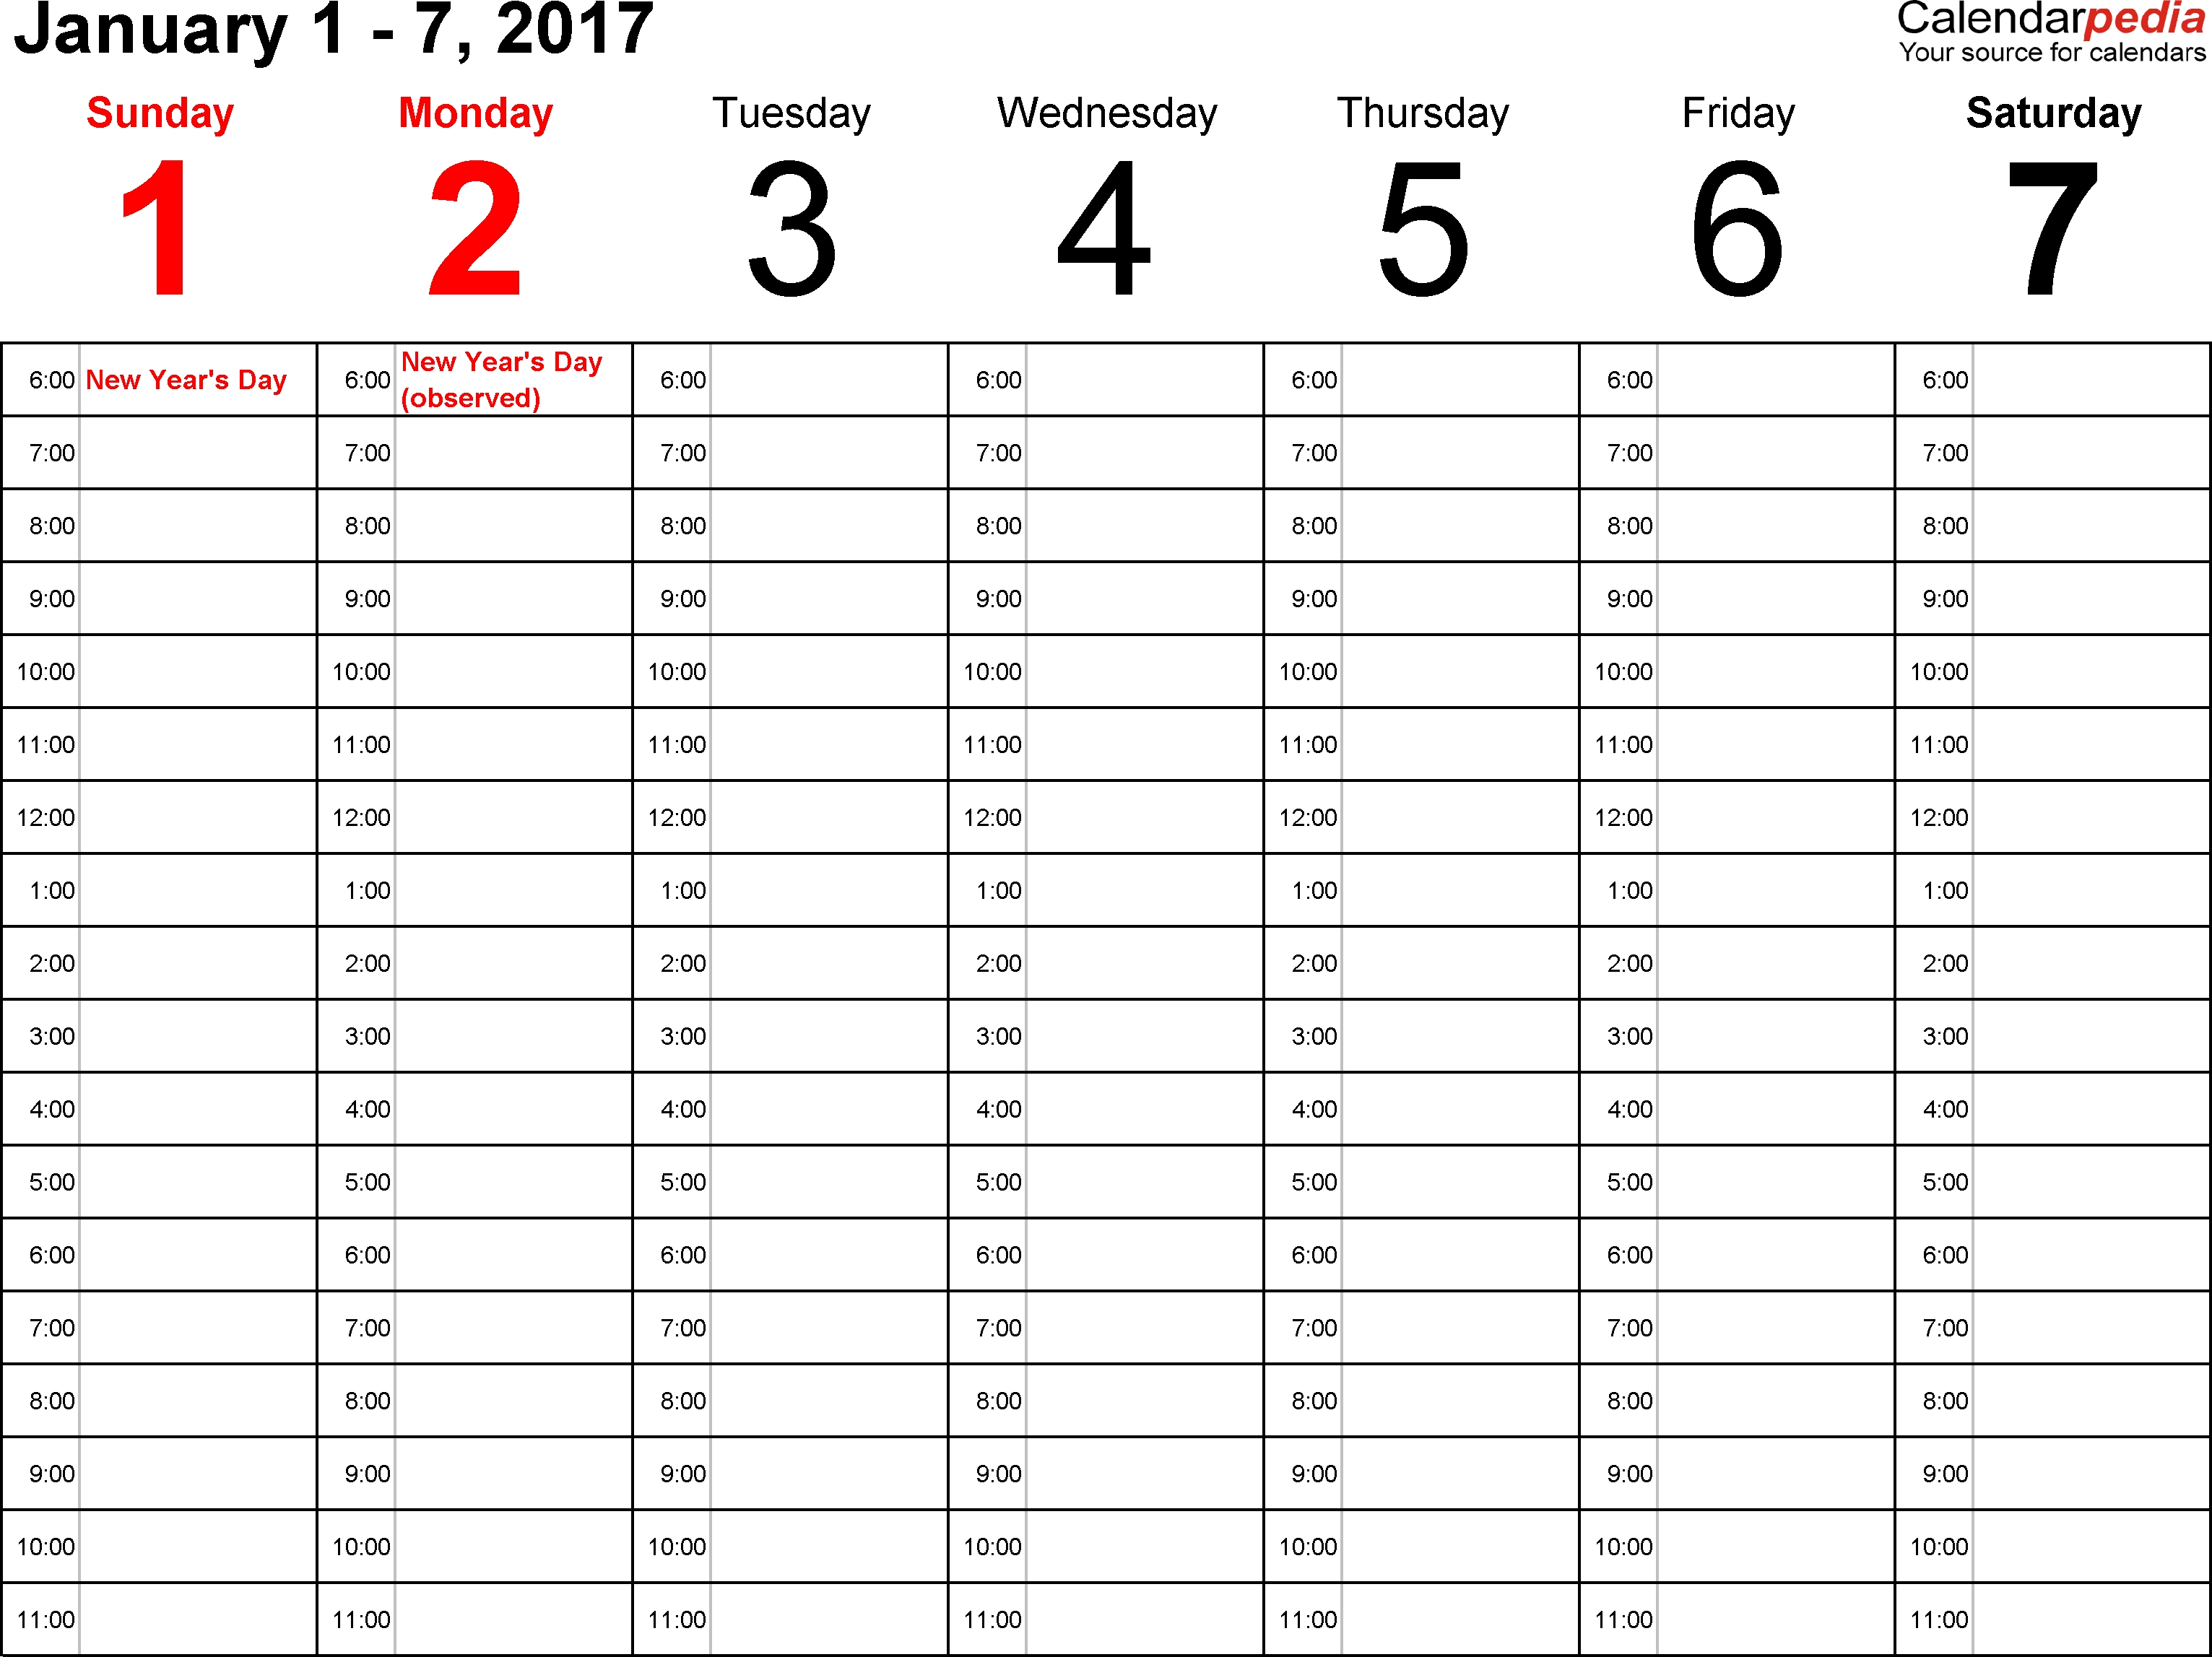 Weekly Calendars 2017 For Excel - 12 Free Printable Templates